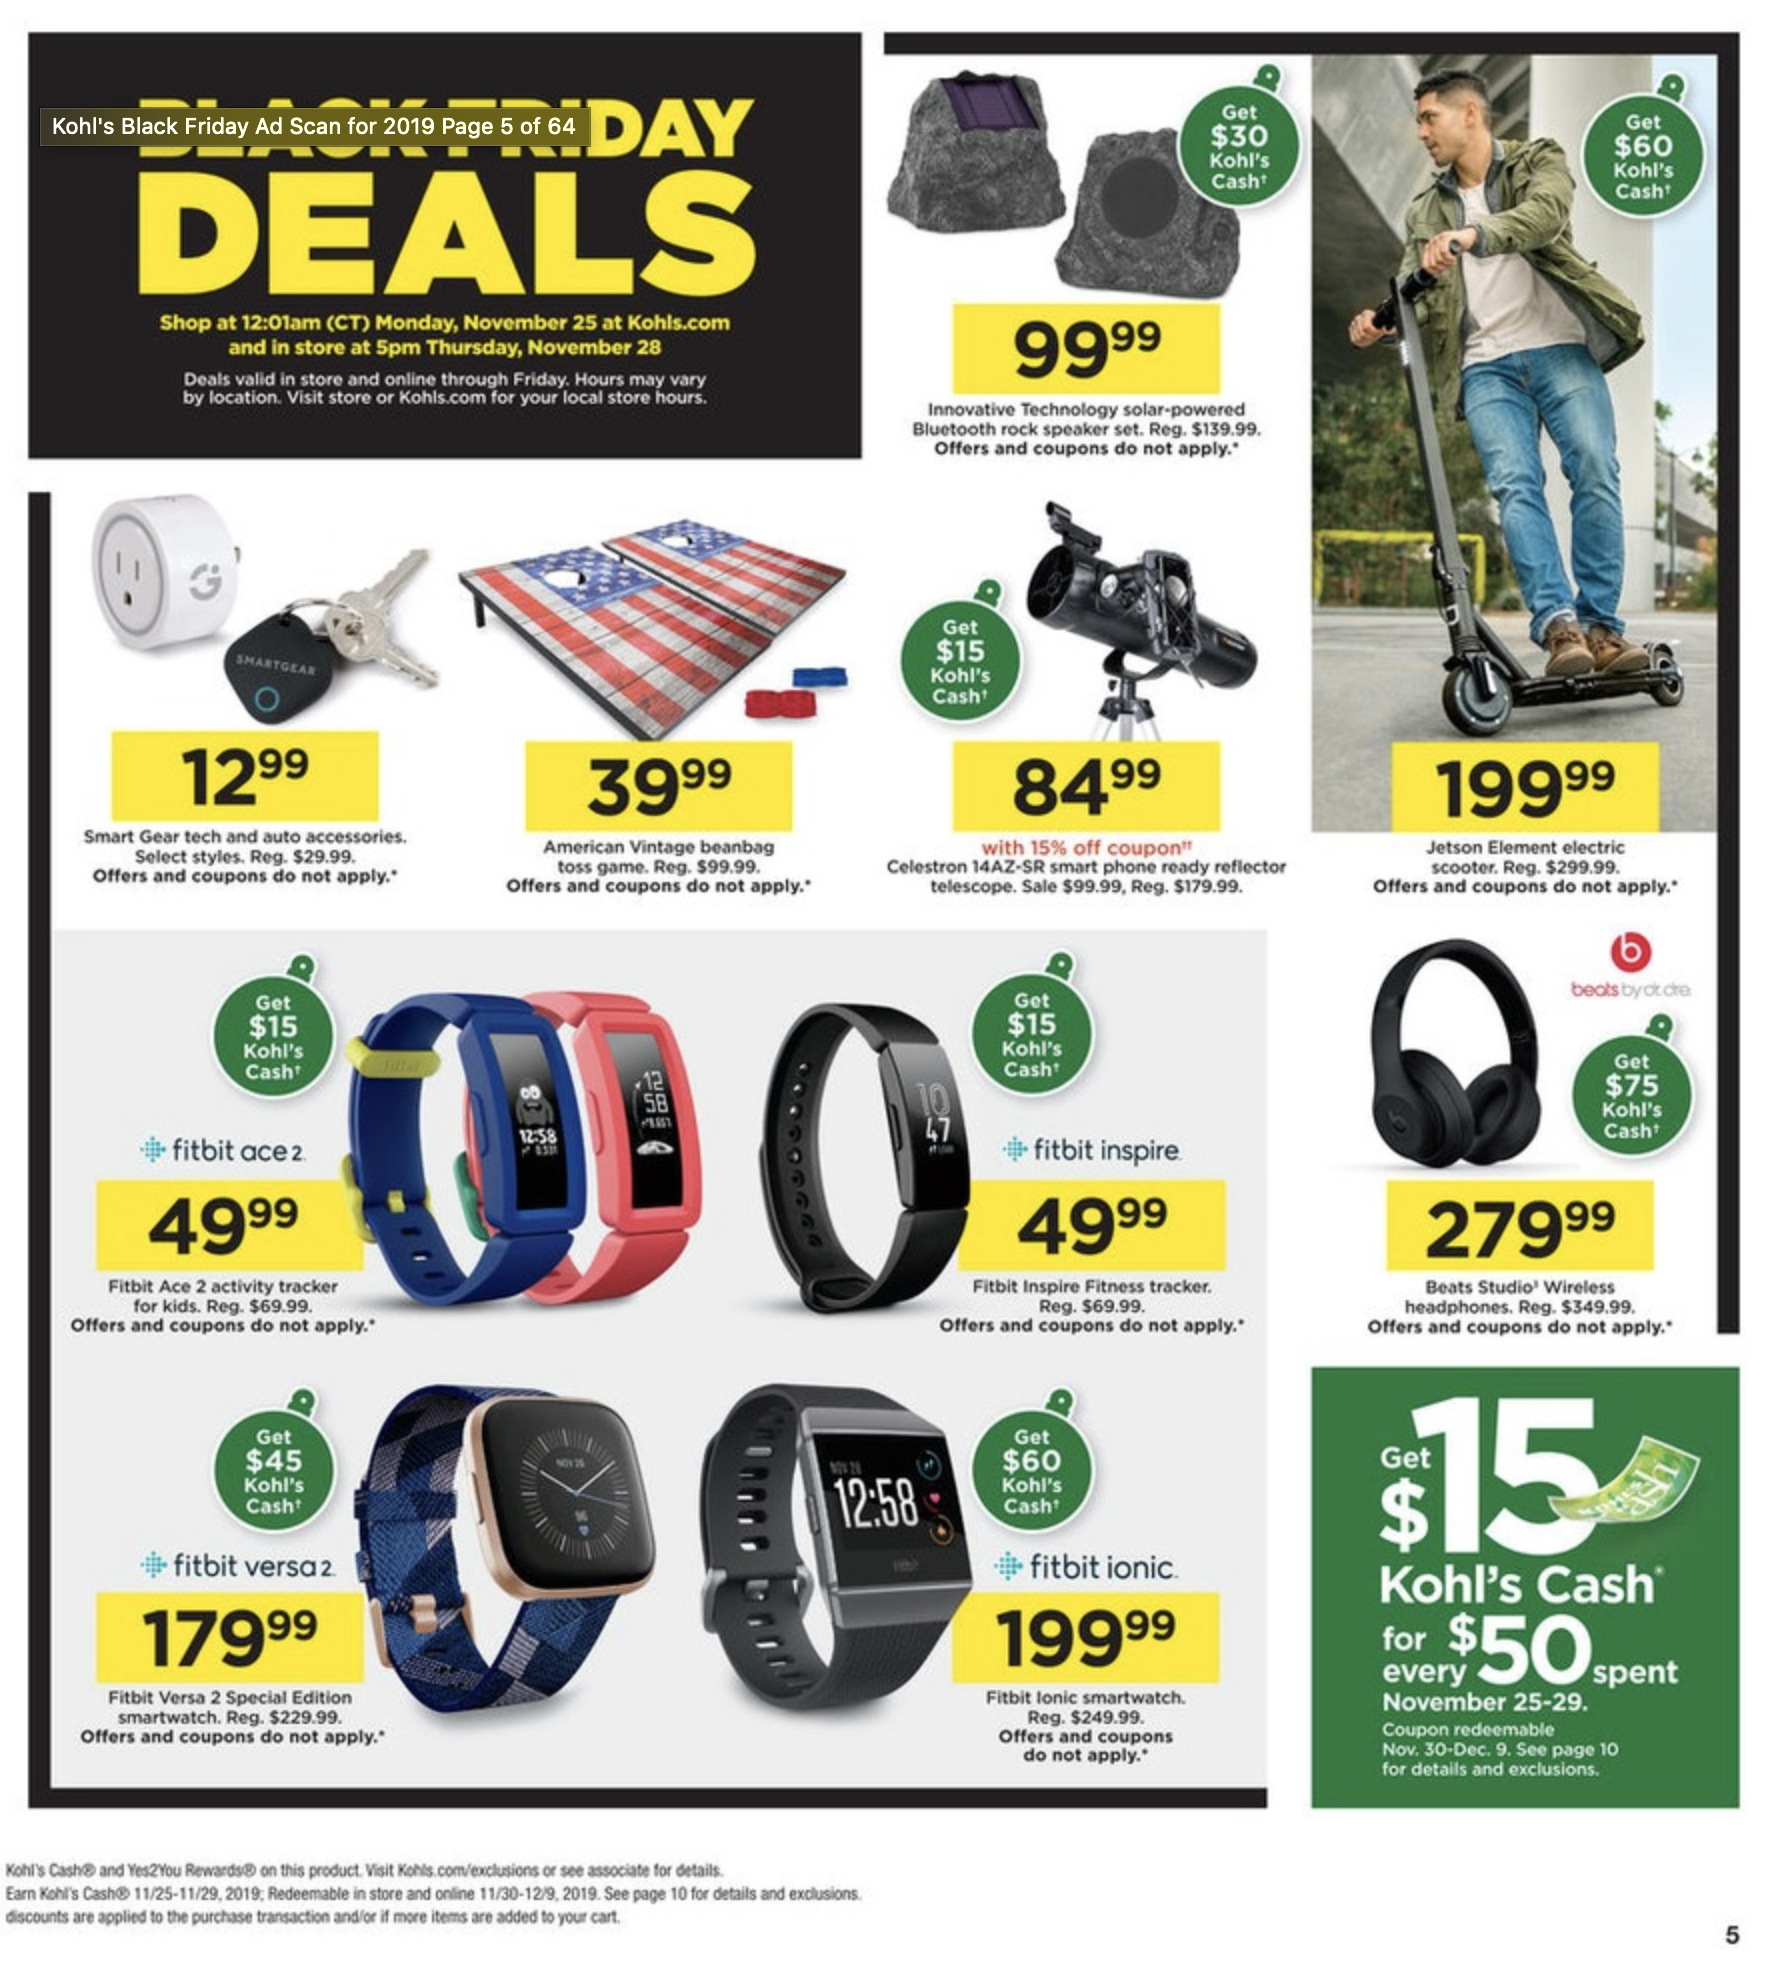 Kohl's Black Friday in July 2019 - Ad & Deals